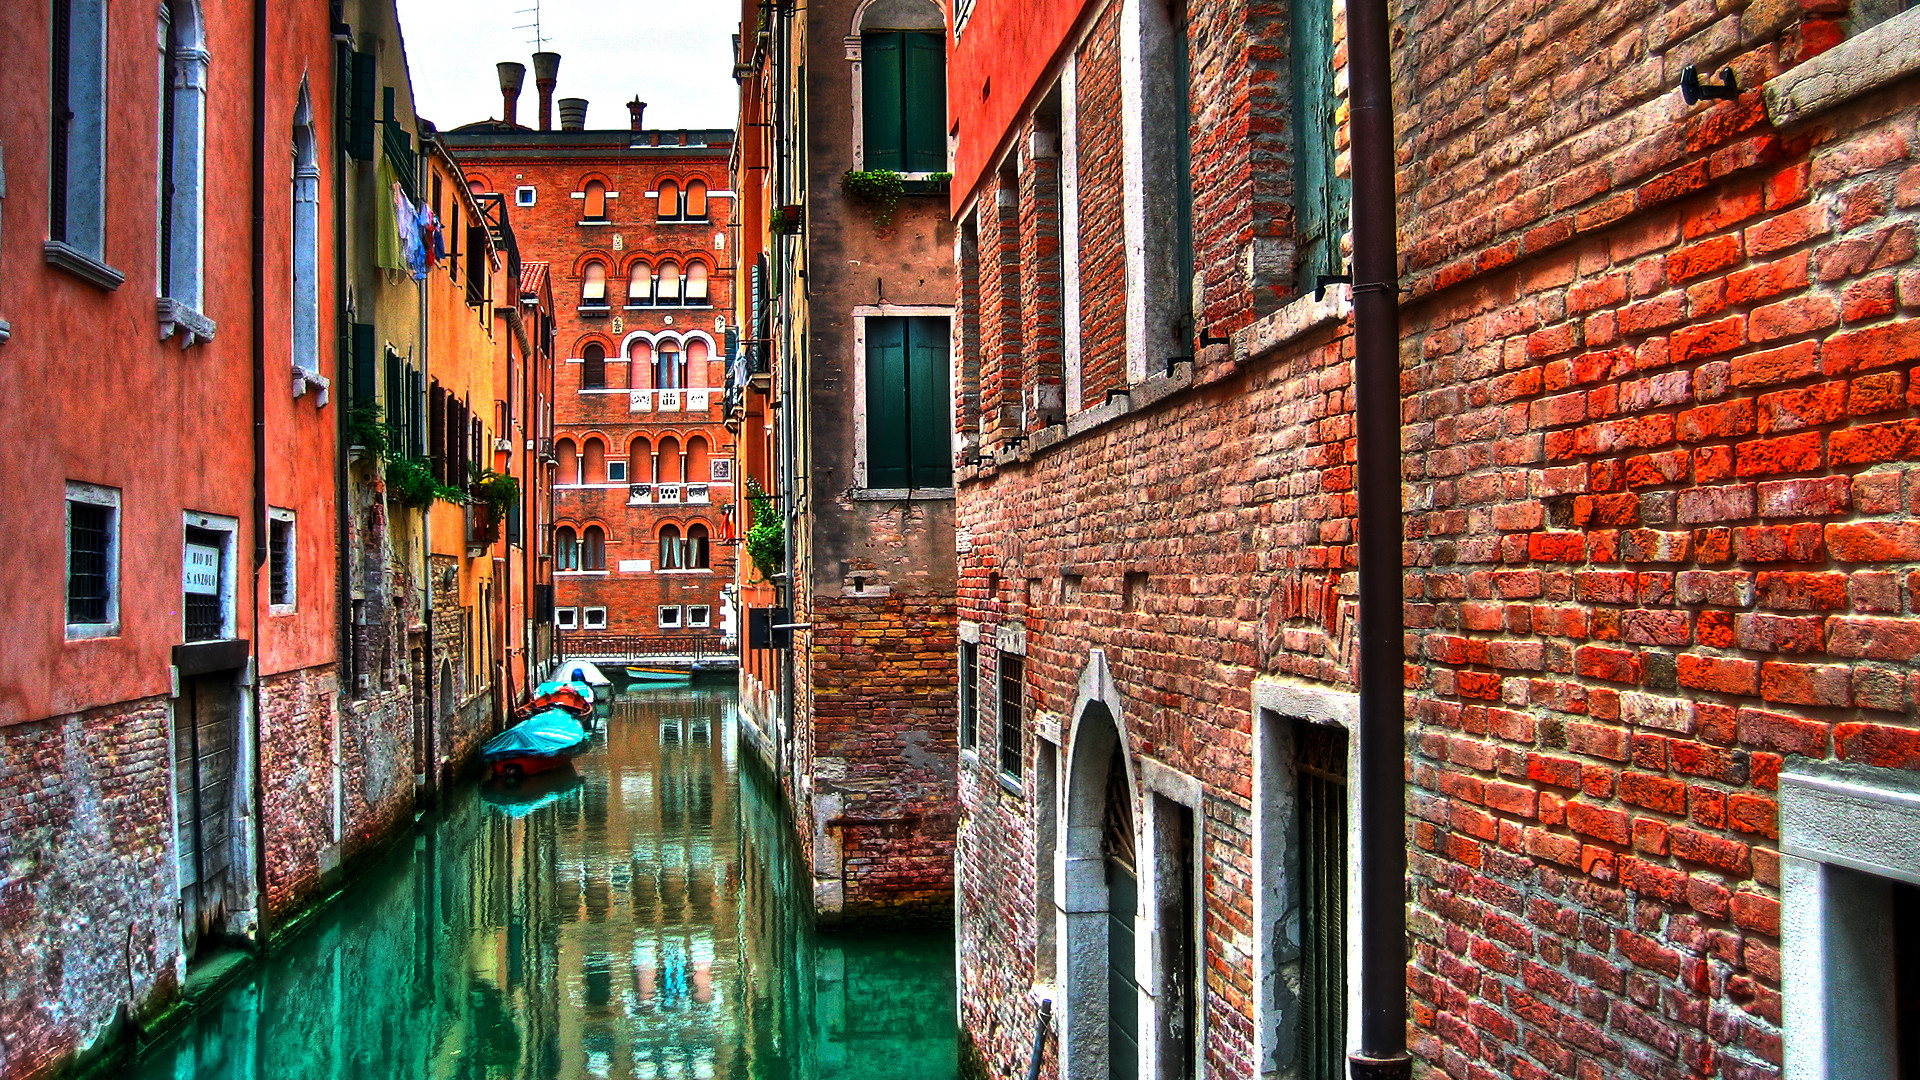 1920x1080 Venice Italy Wallpaper Download Free.